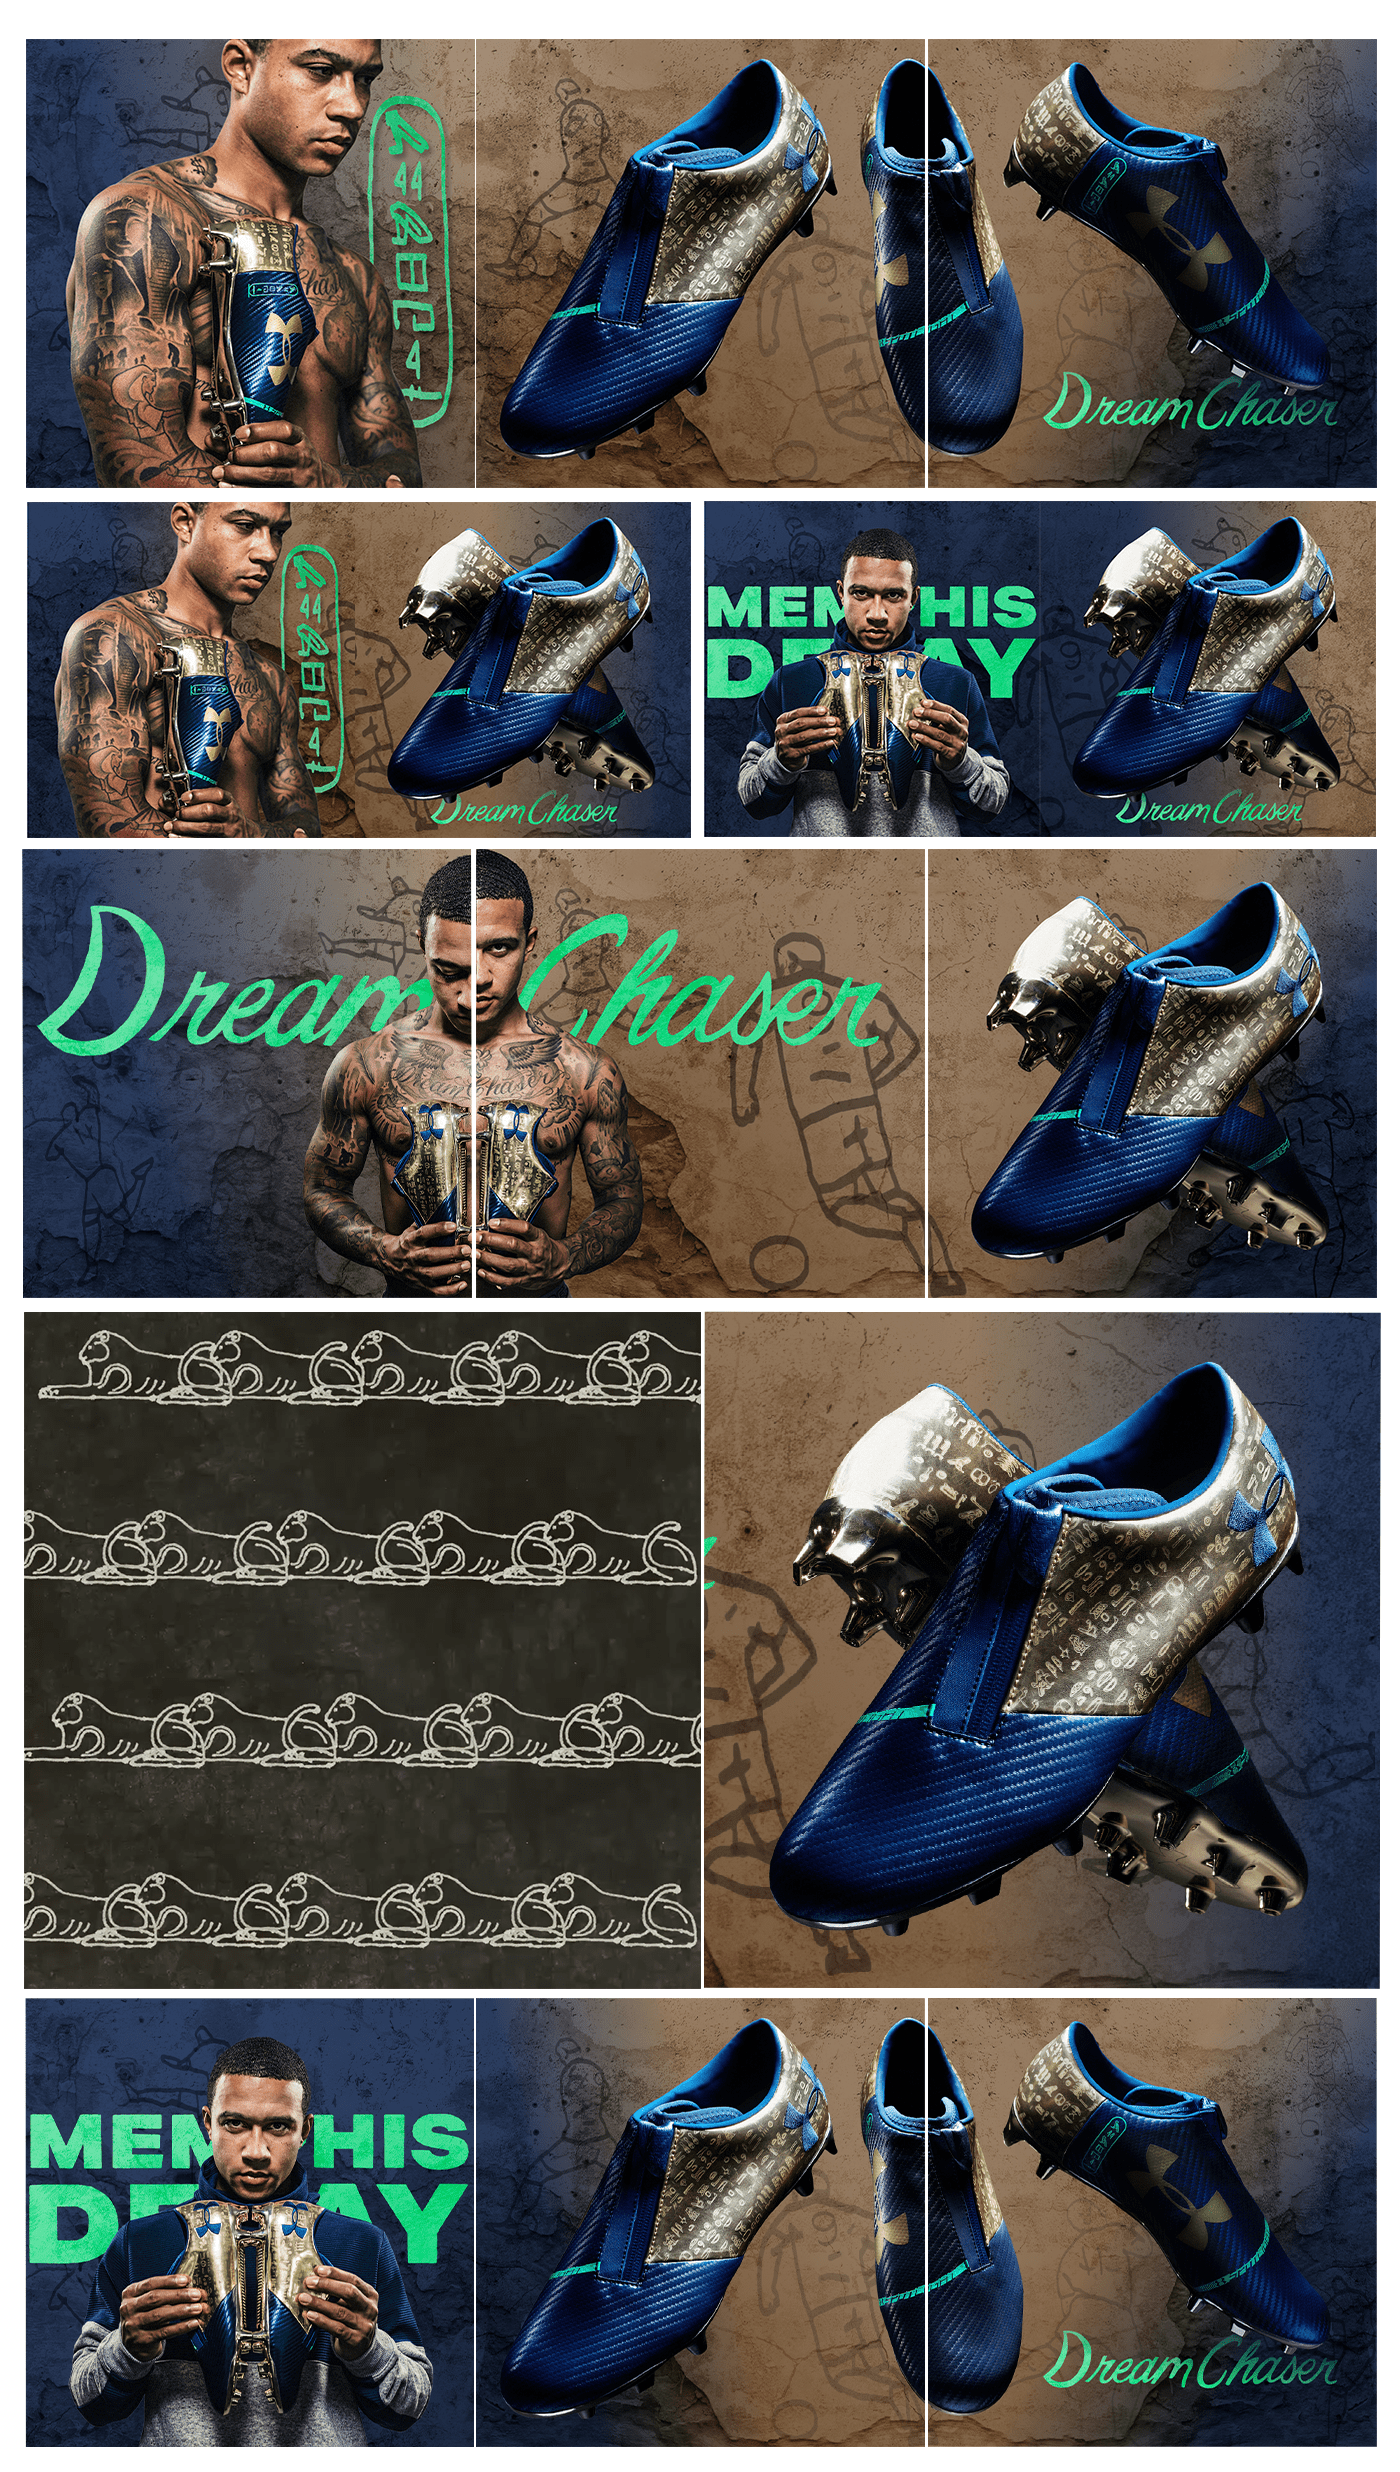 dream chaser Dream Chaser boots football Memphis Depay Memphis depay boots Memphis Depay tattoos Memphis Under Armour pharaoh Under Armour Under Armour Football